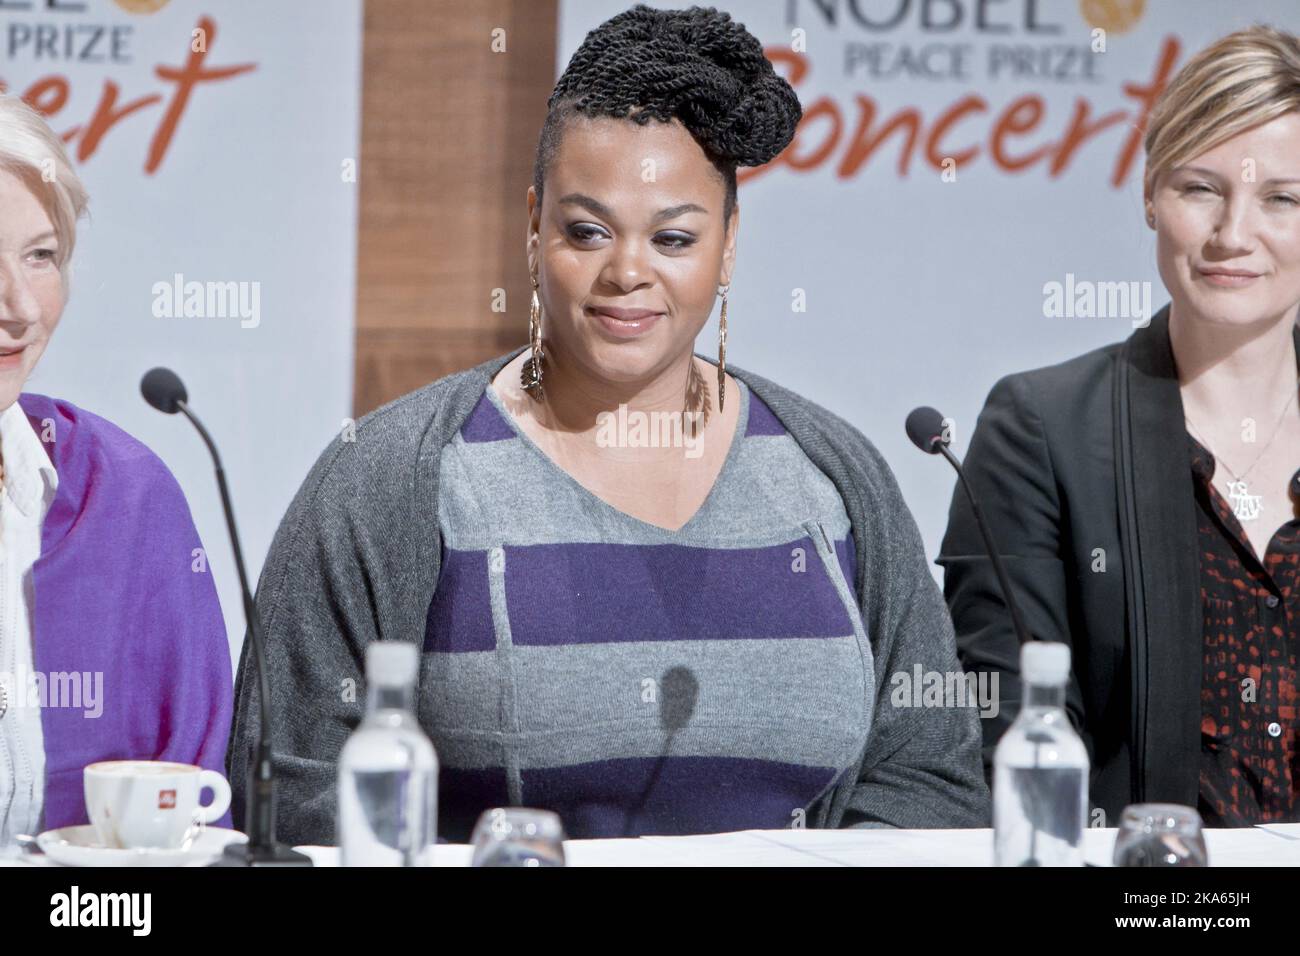 Oslo 20111211. Press conference with this years's artists at the Nobel concert.  Jill Scott. Photo: Krister Soerboe / SCANPIX NORWAY  Stock Photo